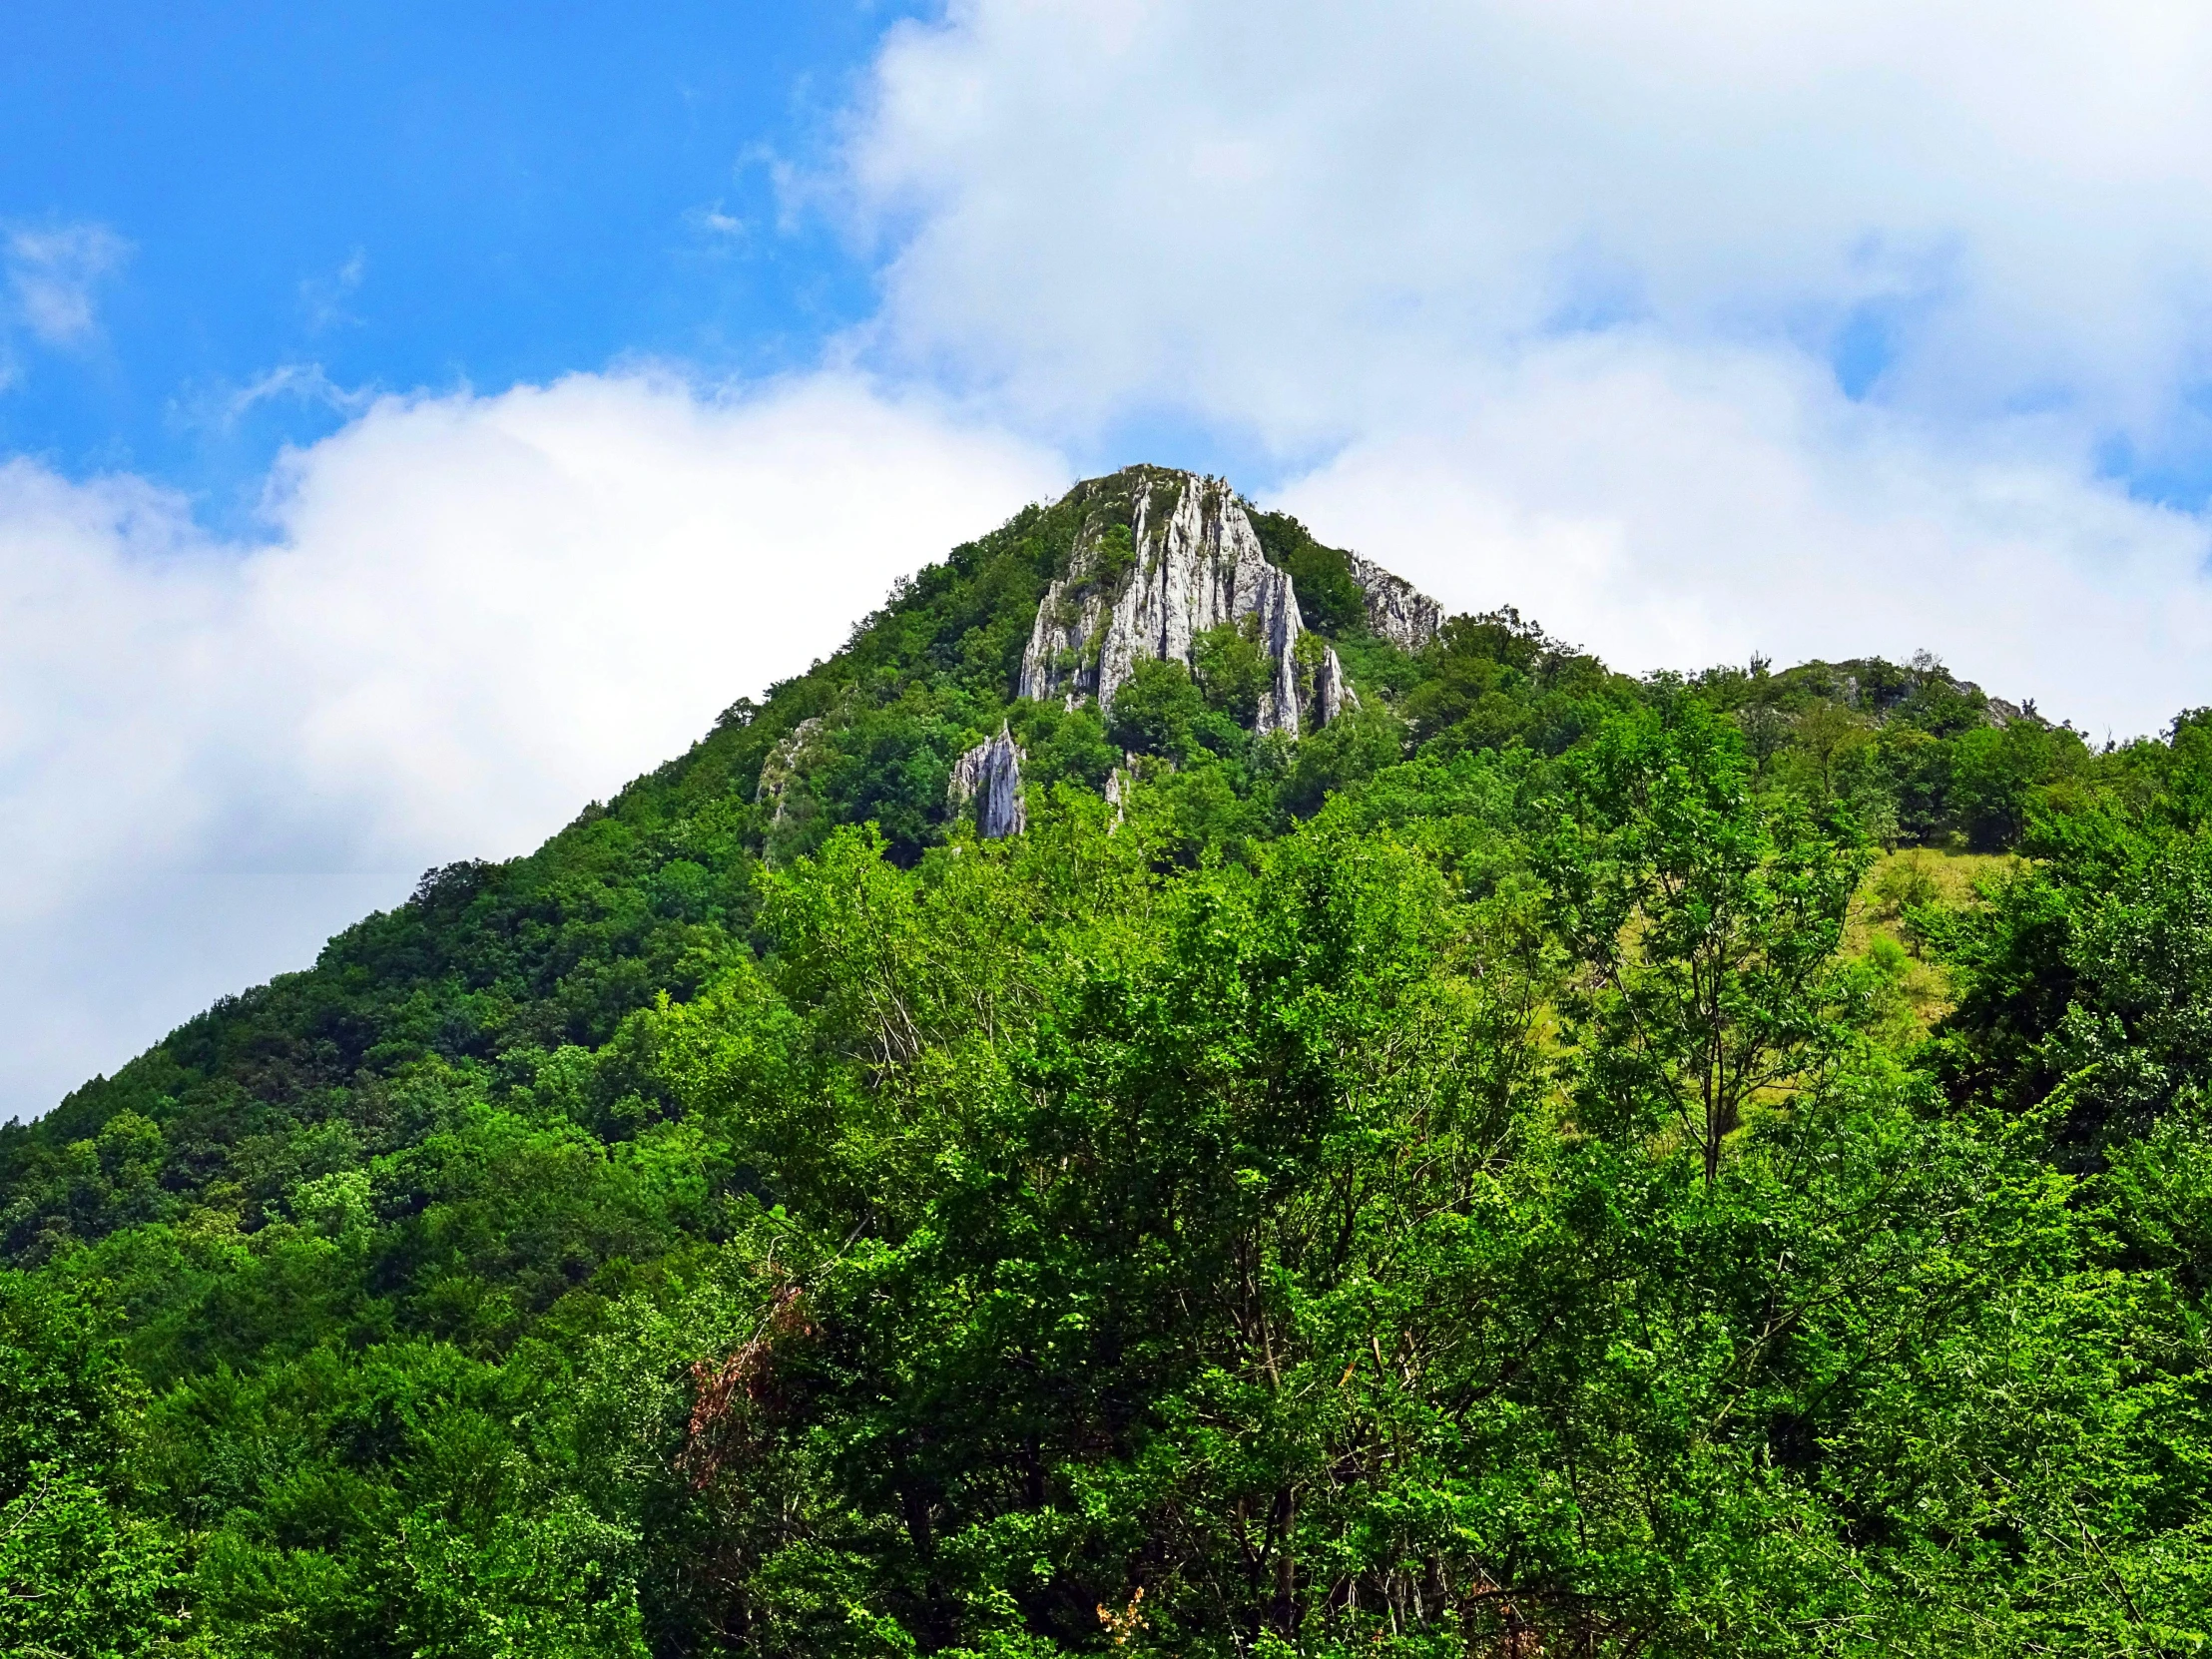 a mountain in the middle of a lush green forest, sōsaku hanga, st cirq lapopie, slide show, thumbnail, bright sky